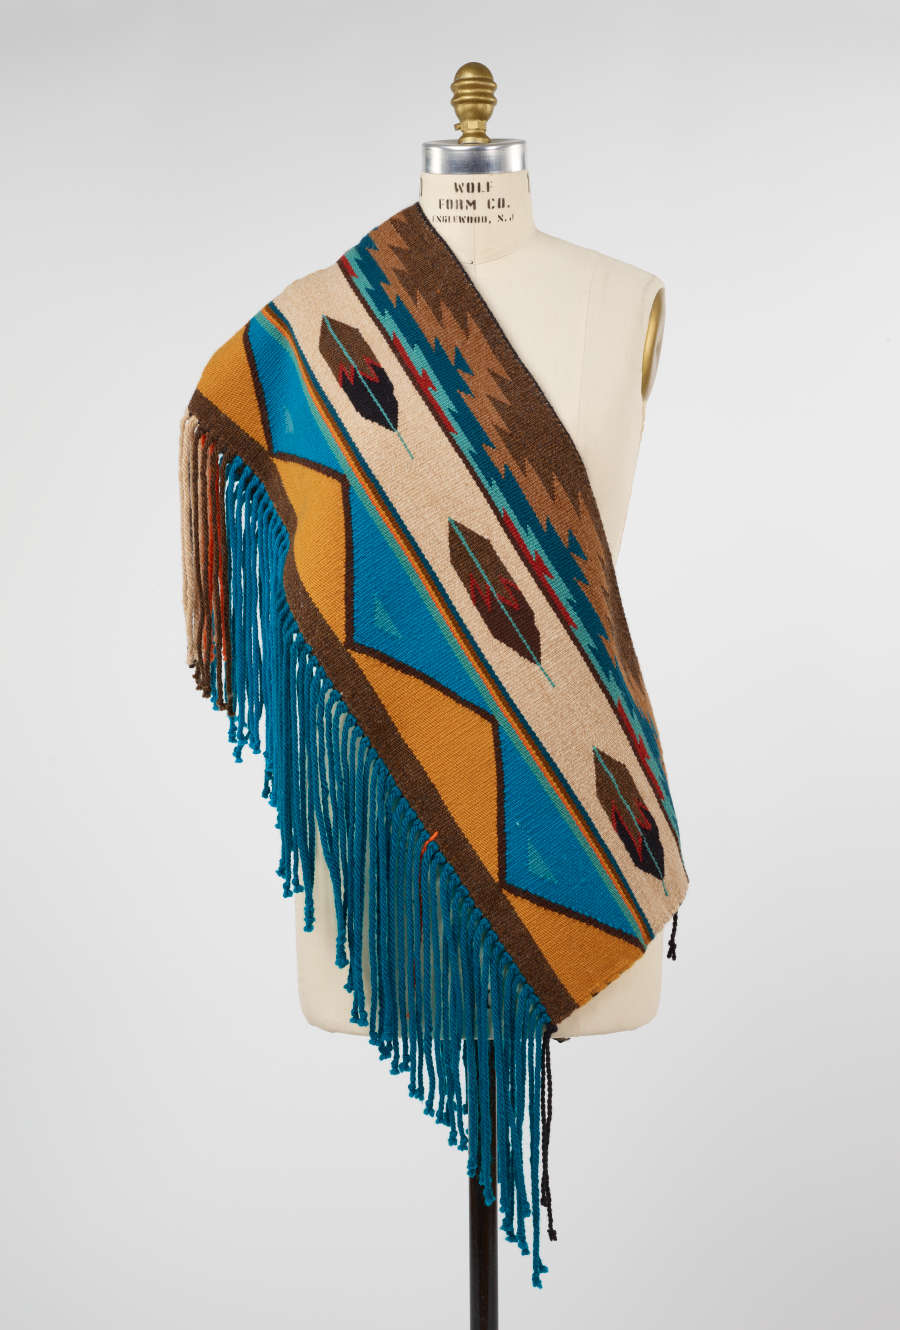 Multicolored woven tapestry with patterning and fringe, draped diagonally across the torso of a mannequin. The mannequin's right shoulder is bare with fringed ends cascading off the mannequin’s left-side. 